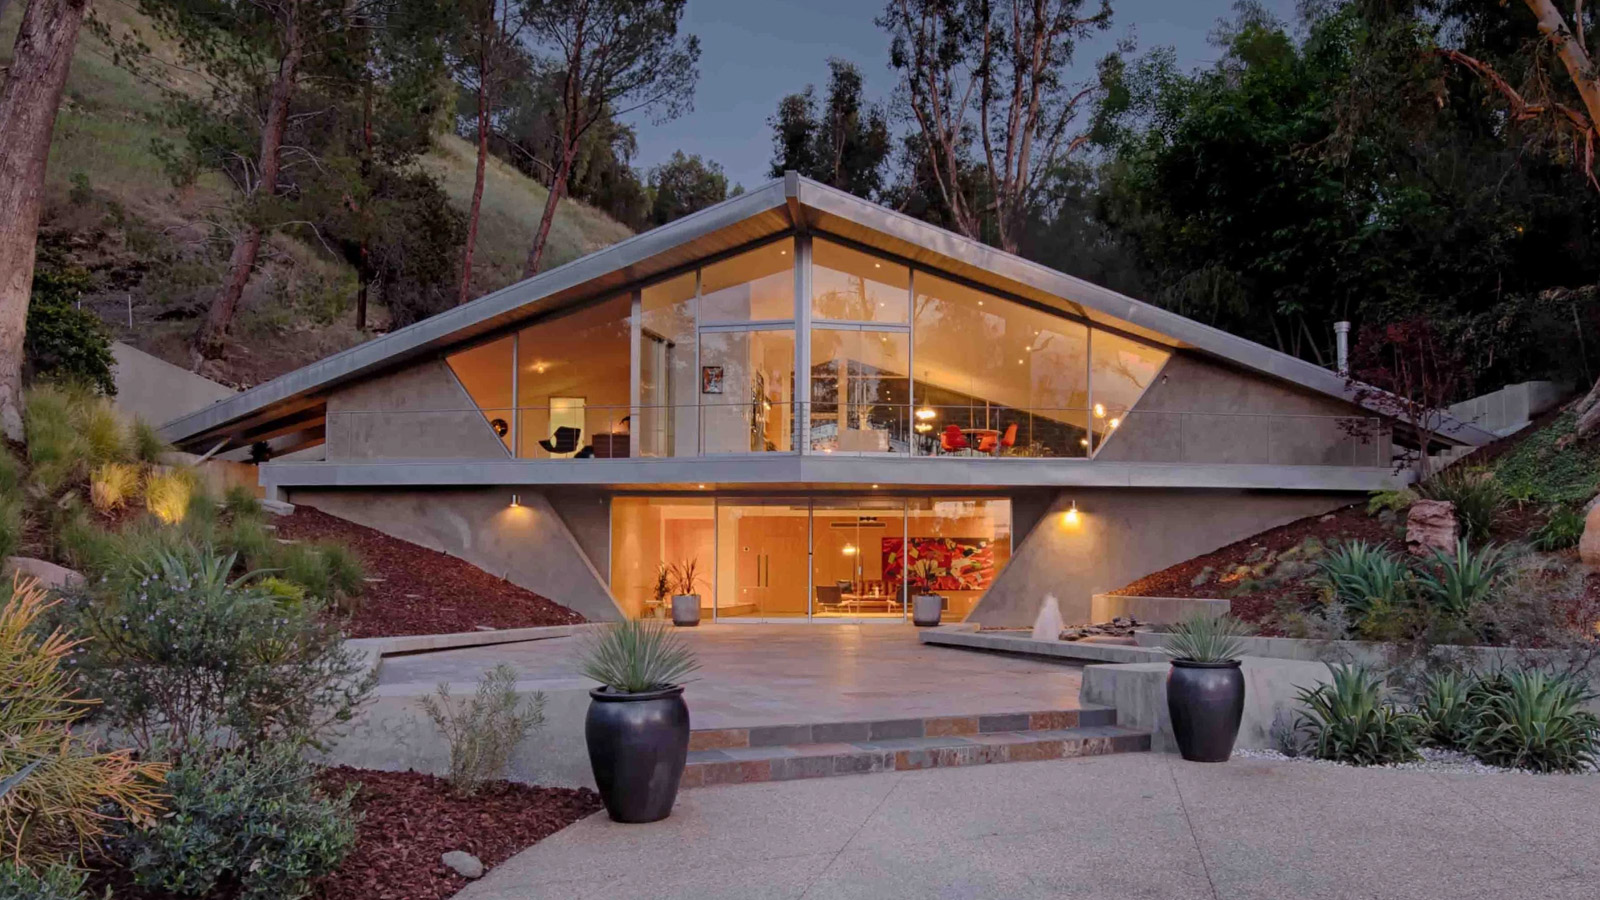 Triangle House by Harry Gesner